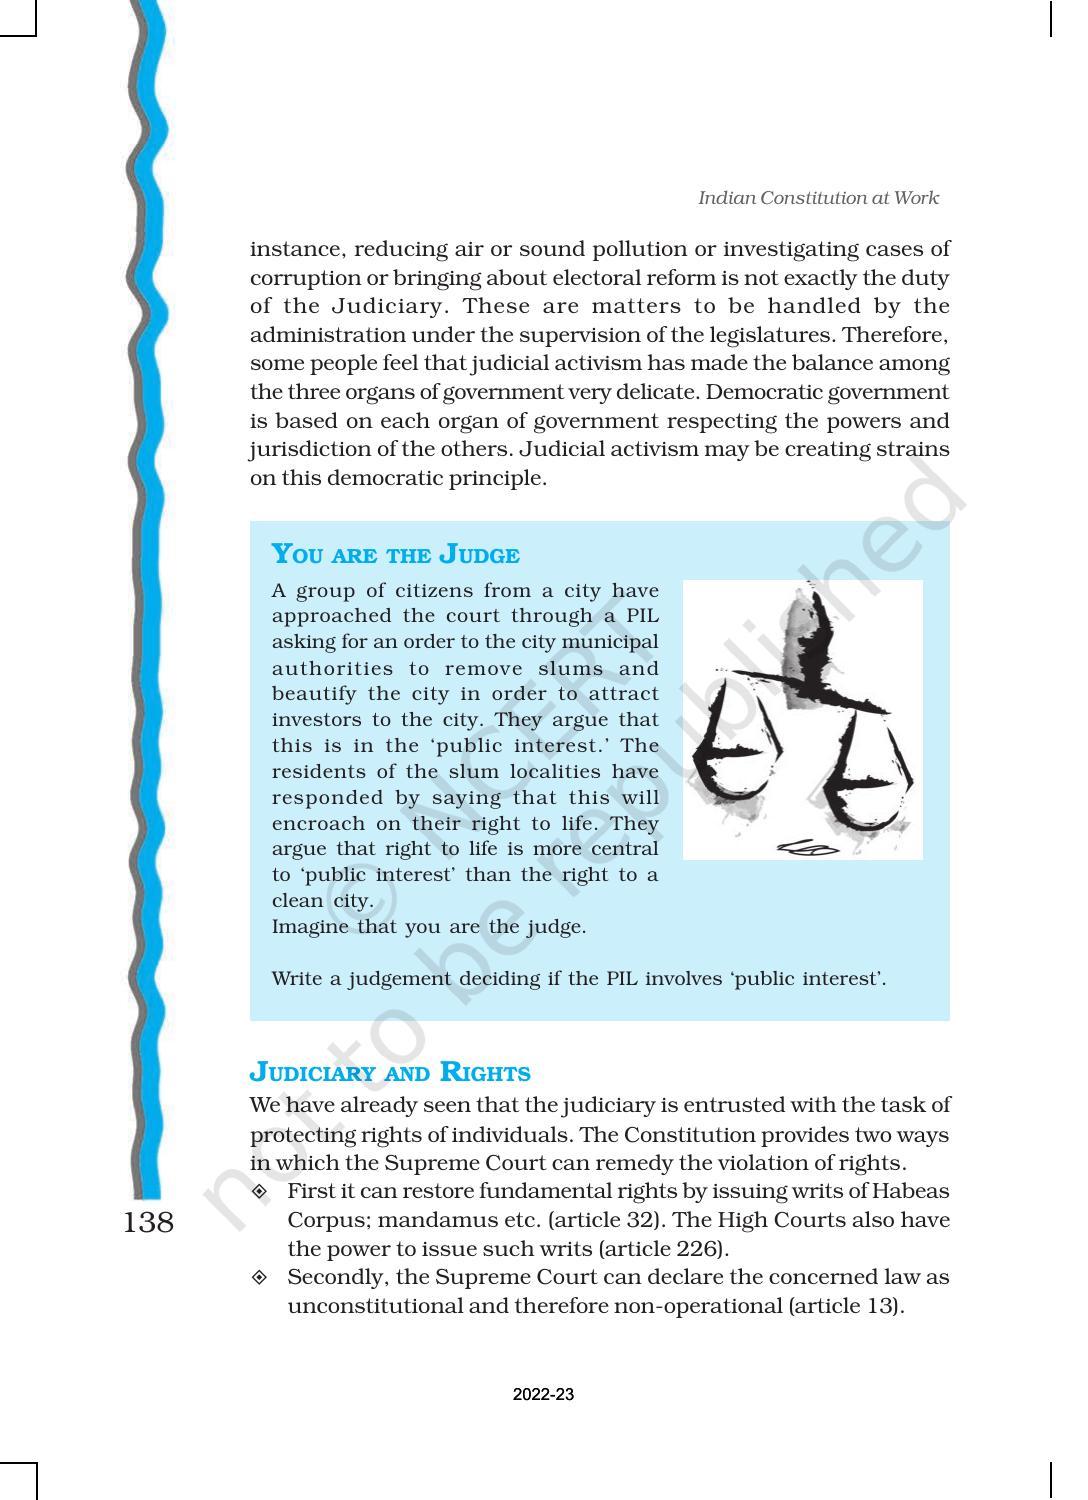 NCERT Book for Class 11 Political Science (Indian Constitution at Work) Chapter 6 Judiciary - Page 15